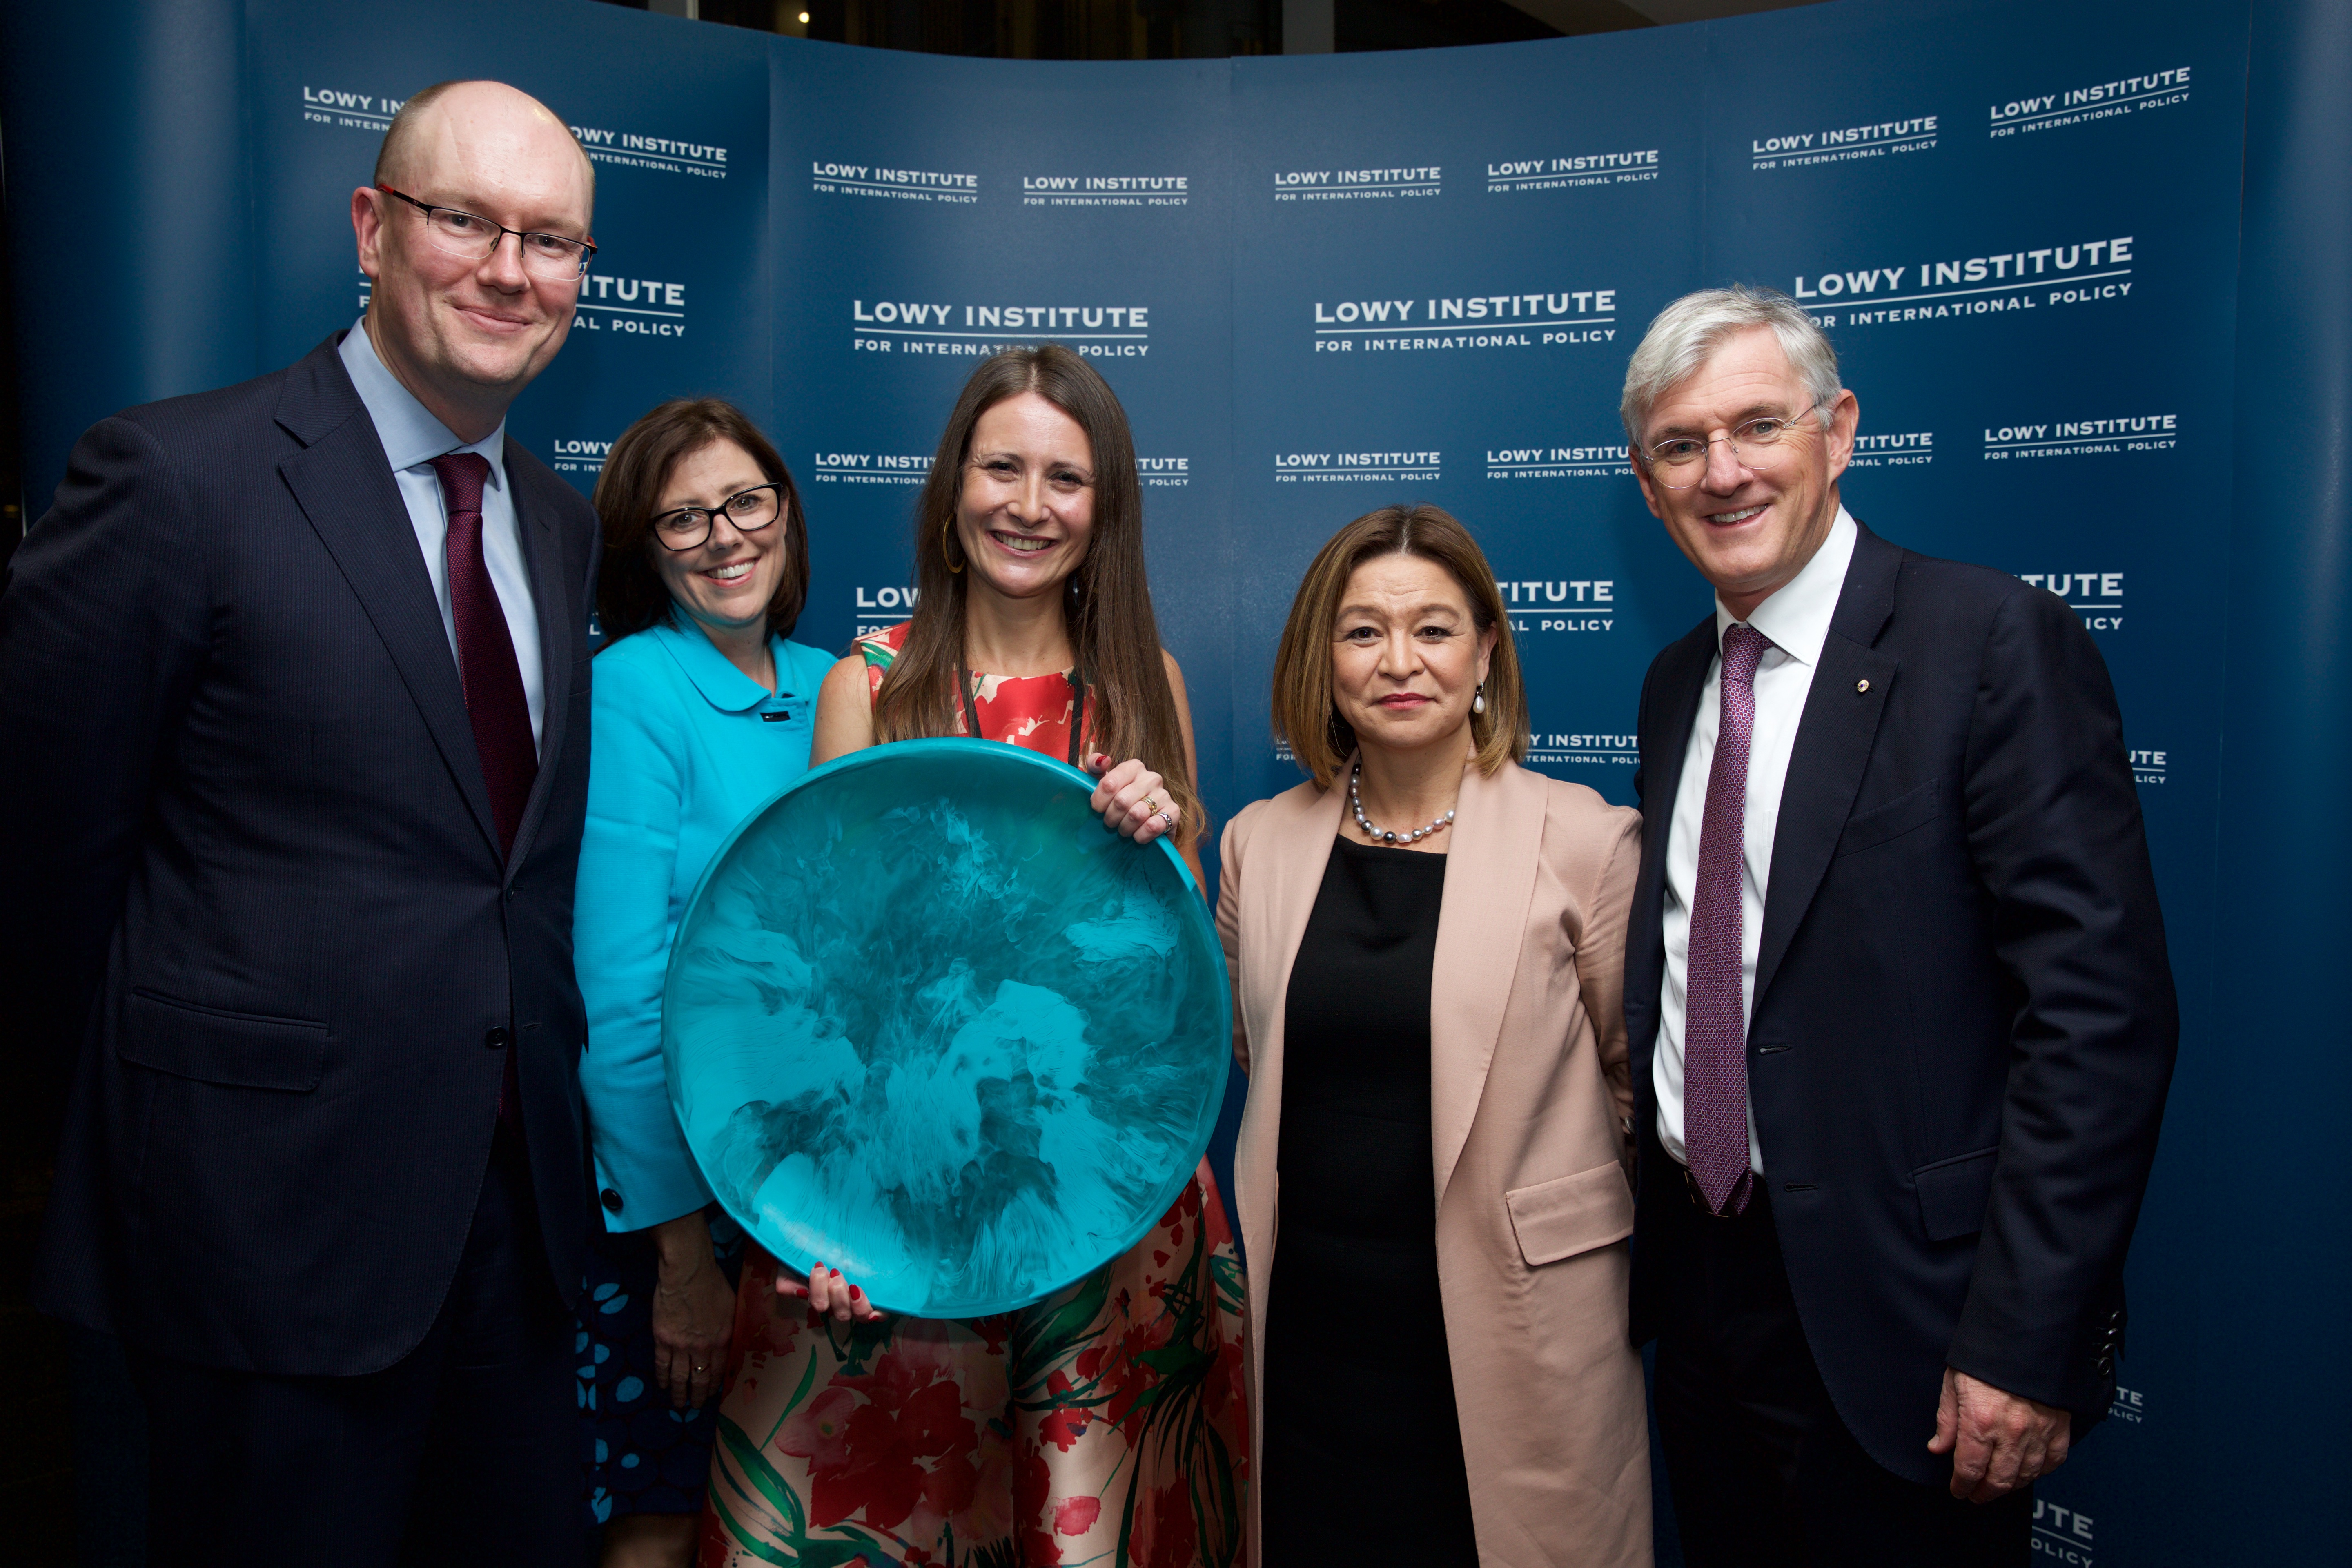 The 2016 Lowy Institute Media Award ceremony. From left to right: Michael Fullilove, Jane Anderson, Jewel Topsfield, Michelle Guthrie and Steven Lowy. 